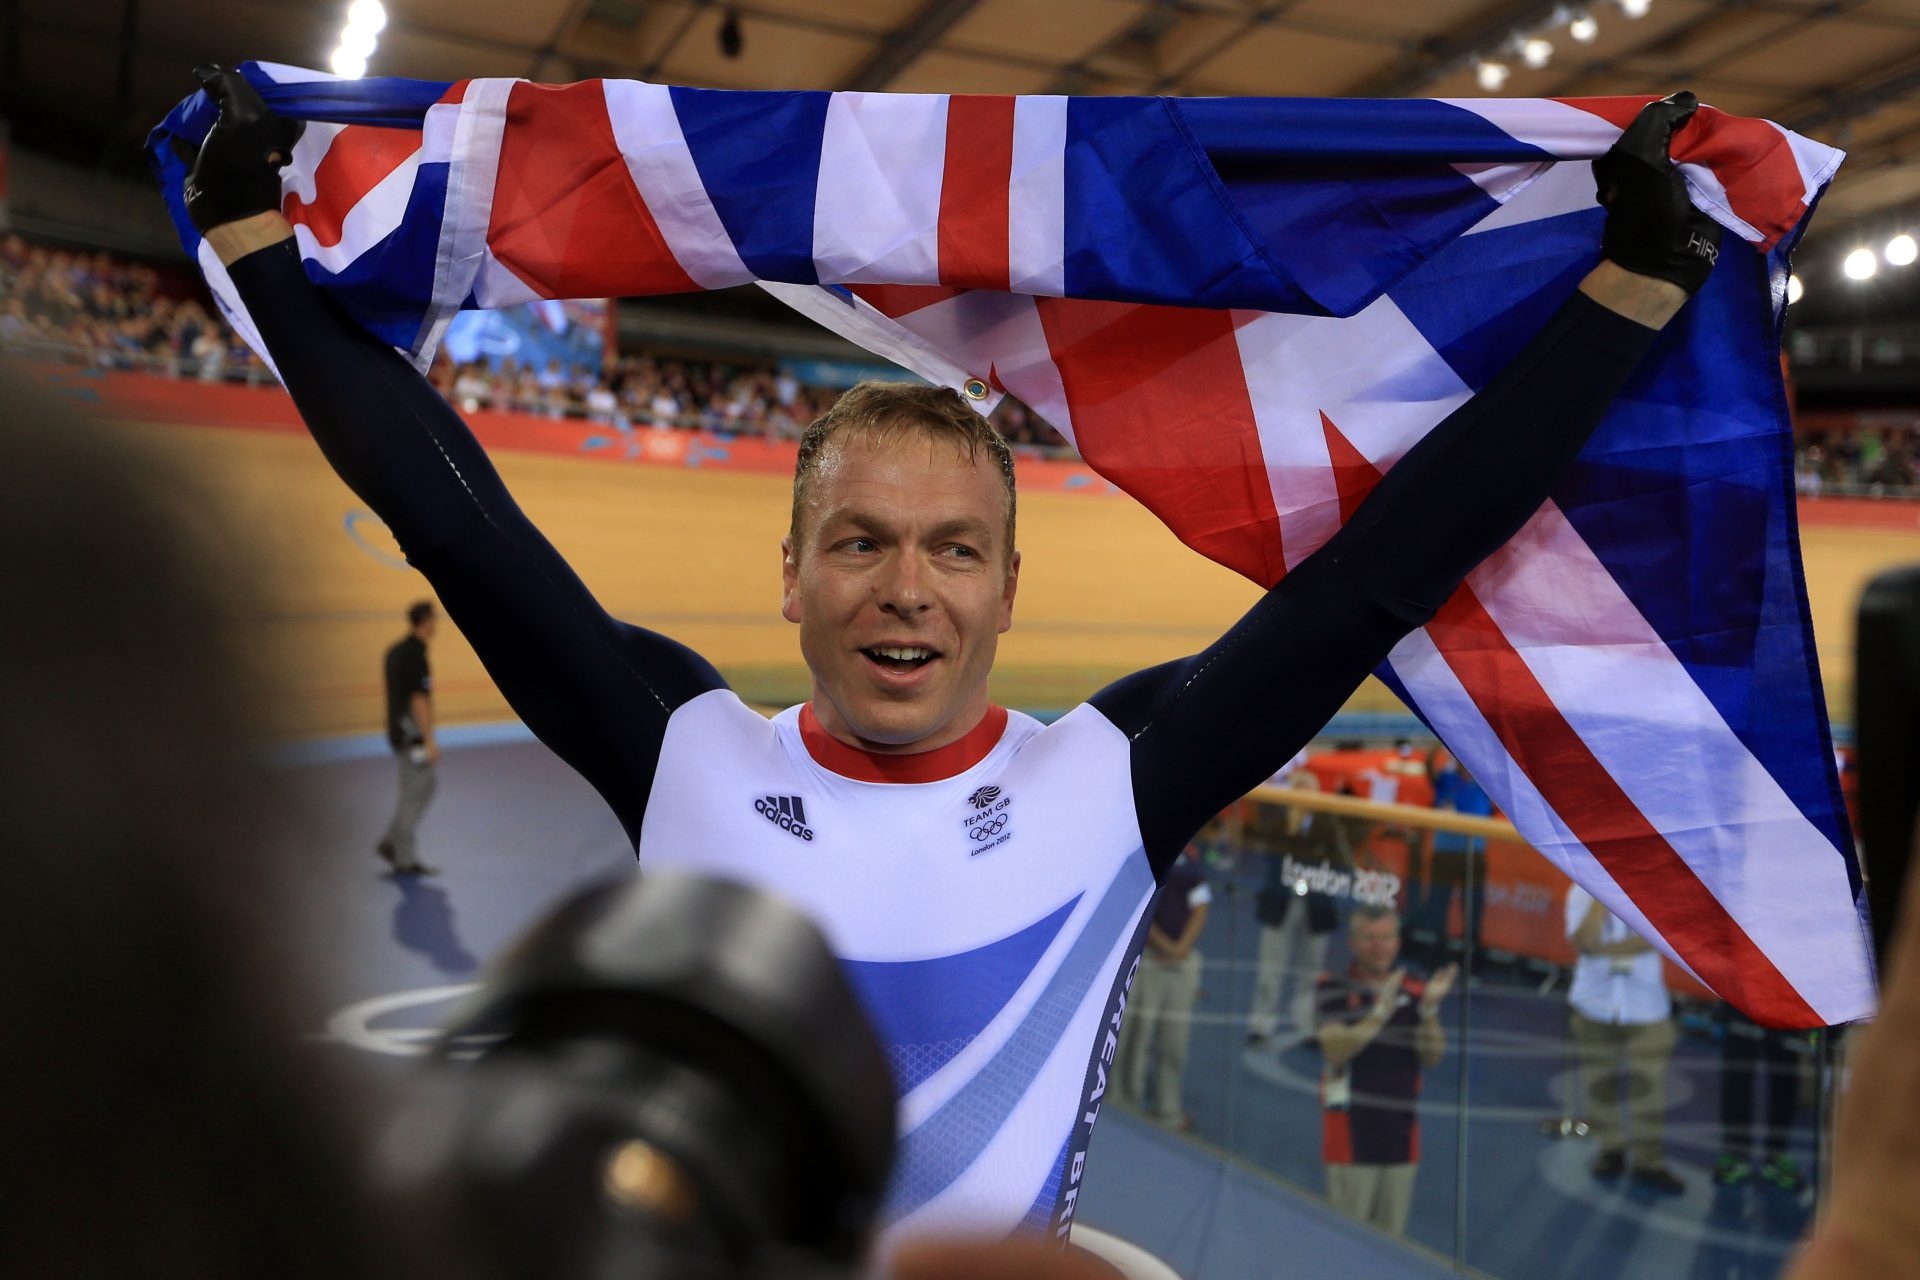 The extraordinary story of Sir Chris Hoy, a truly Great Briton